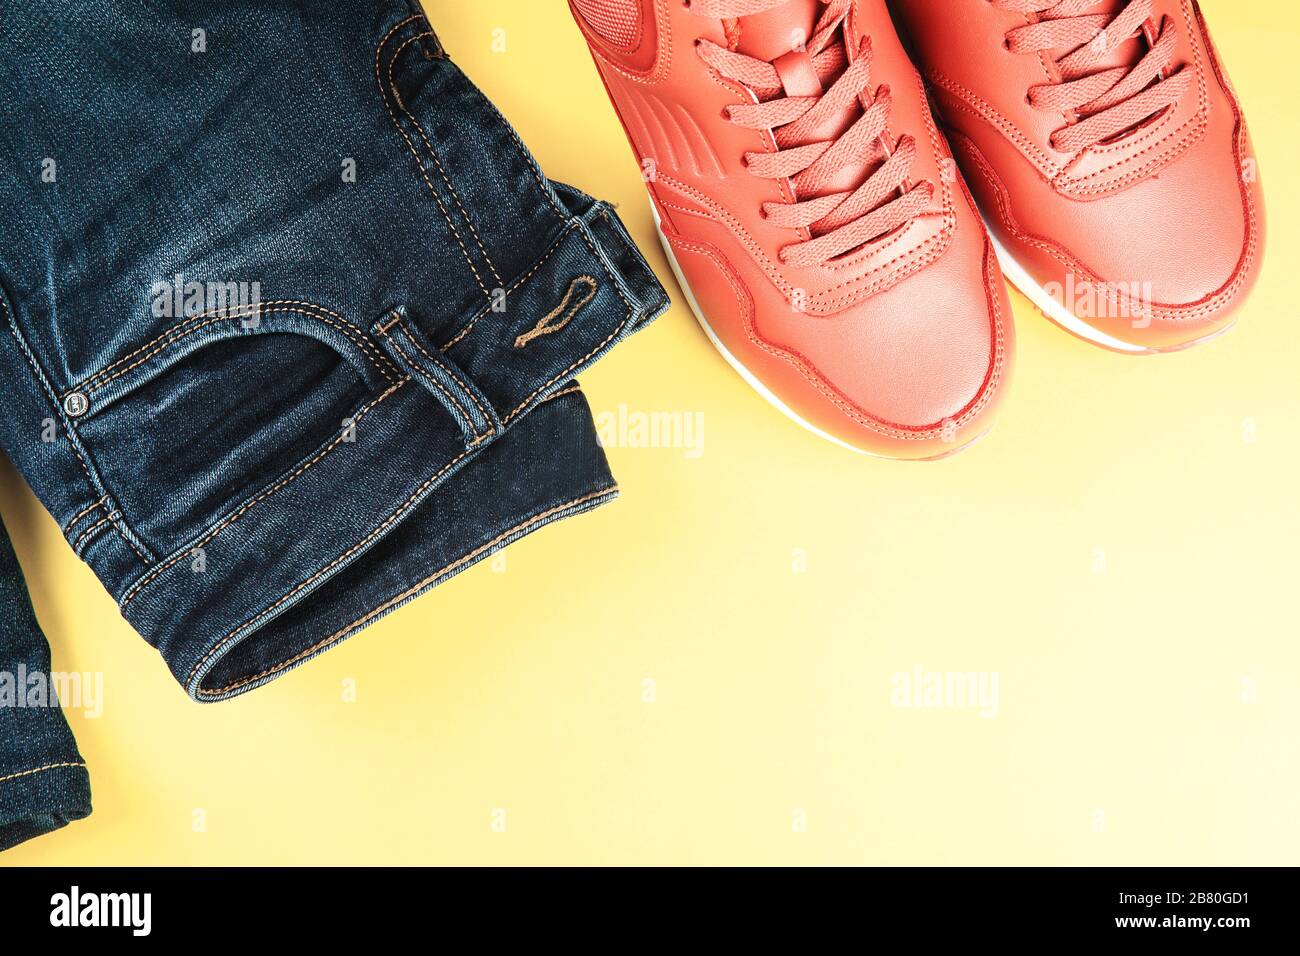 Pink sneakers and blue jeans on pastel yellow background. Concept of sport lifestyle and casual style. Place for text, flat lay, top view. Stock Photo